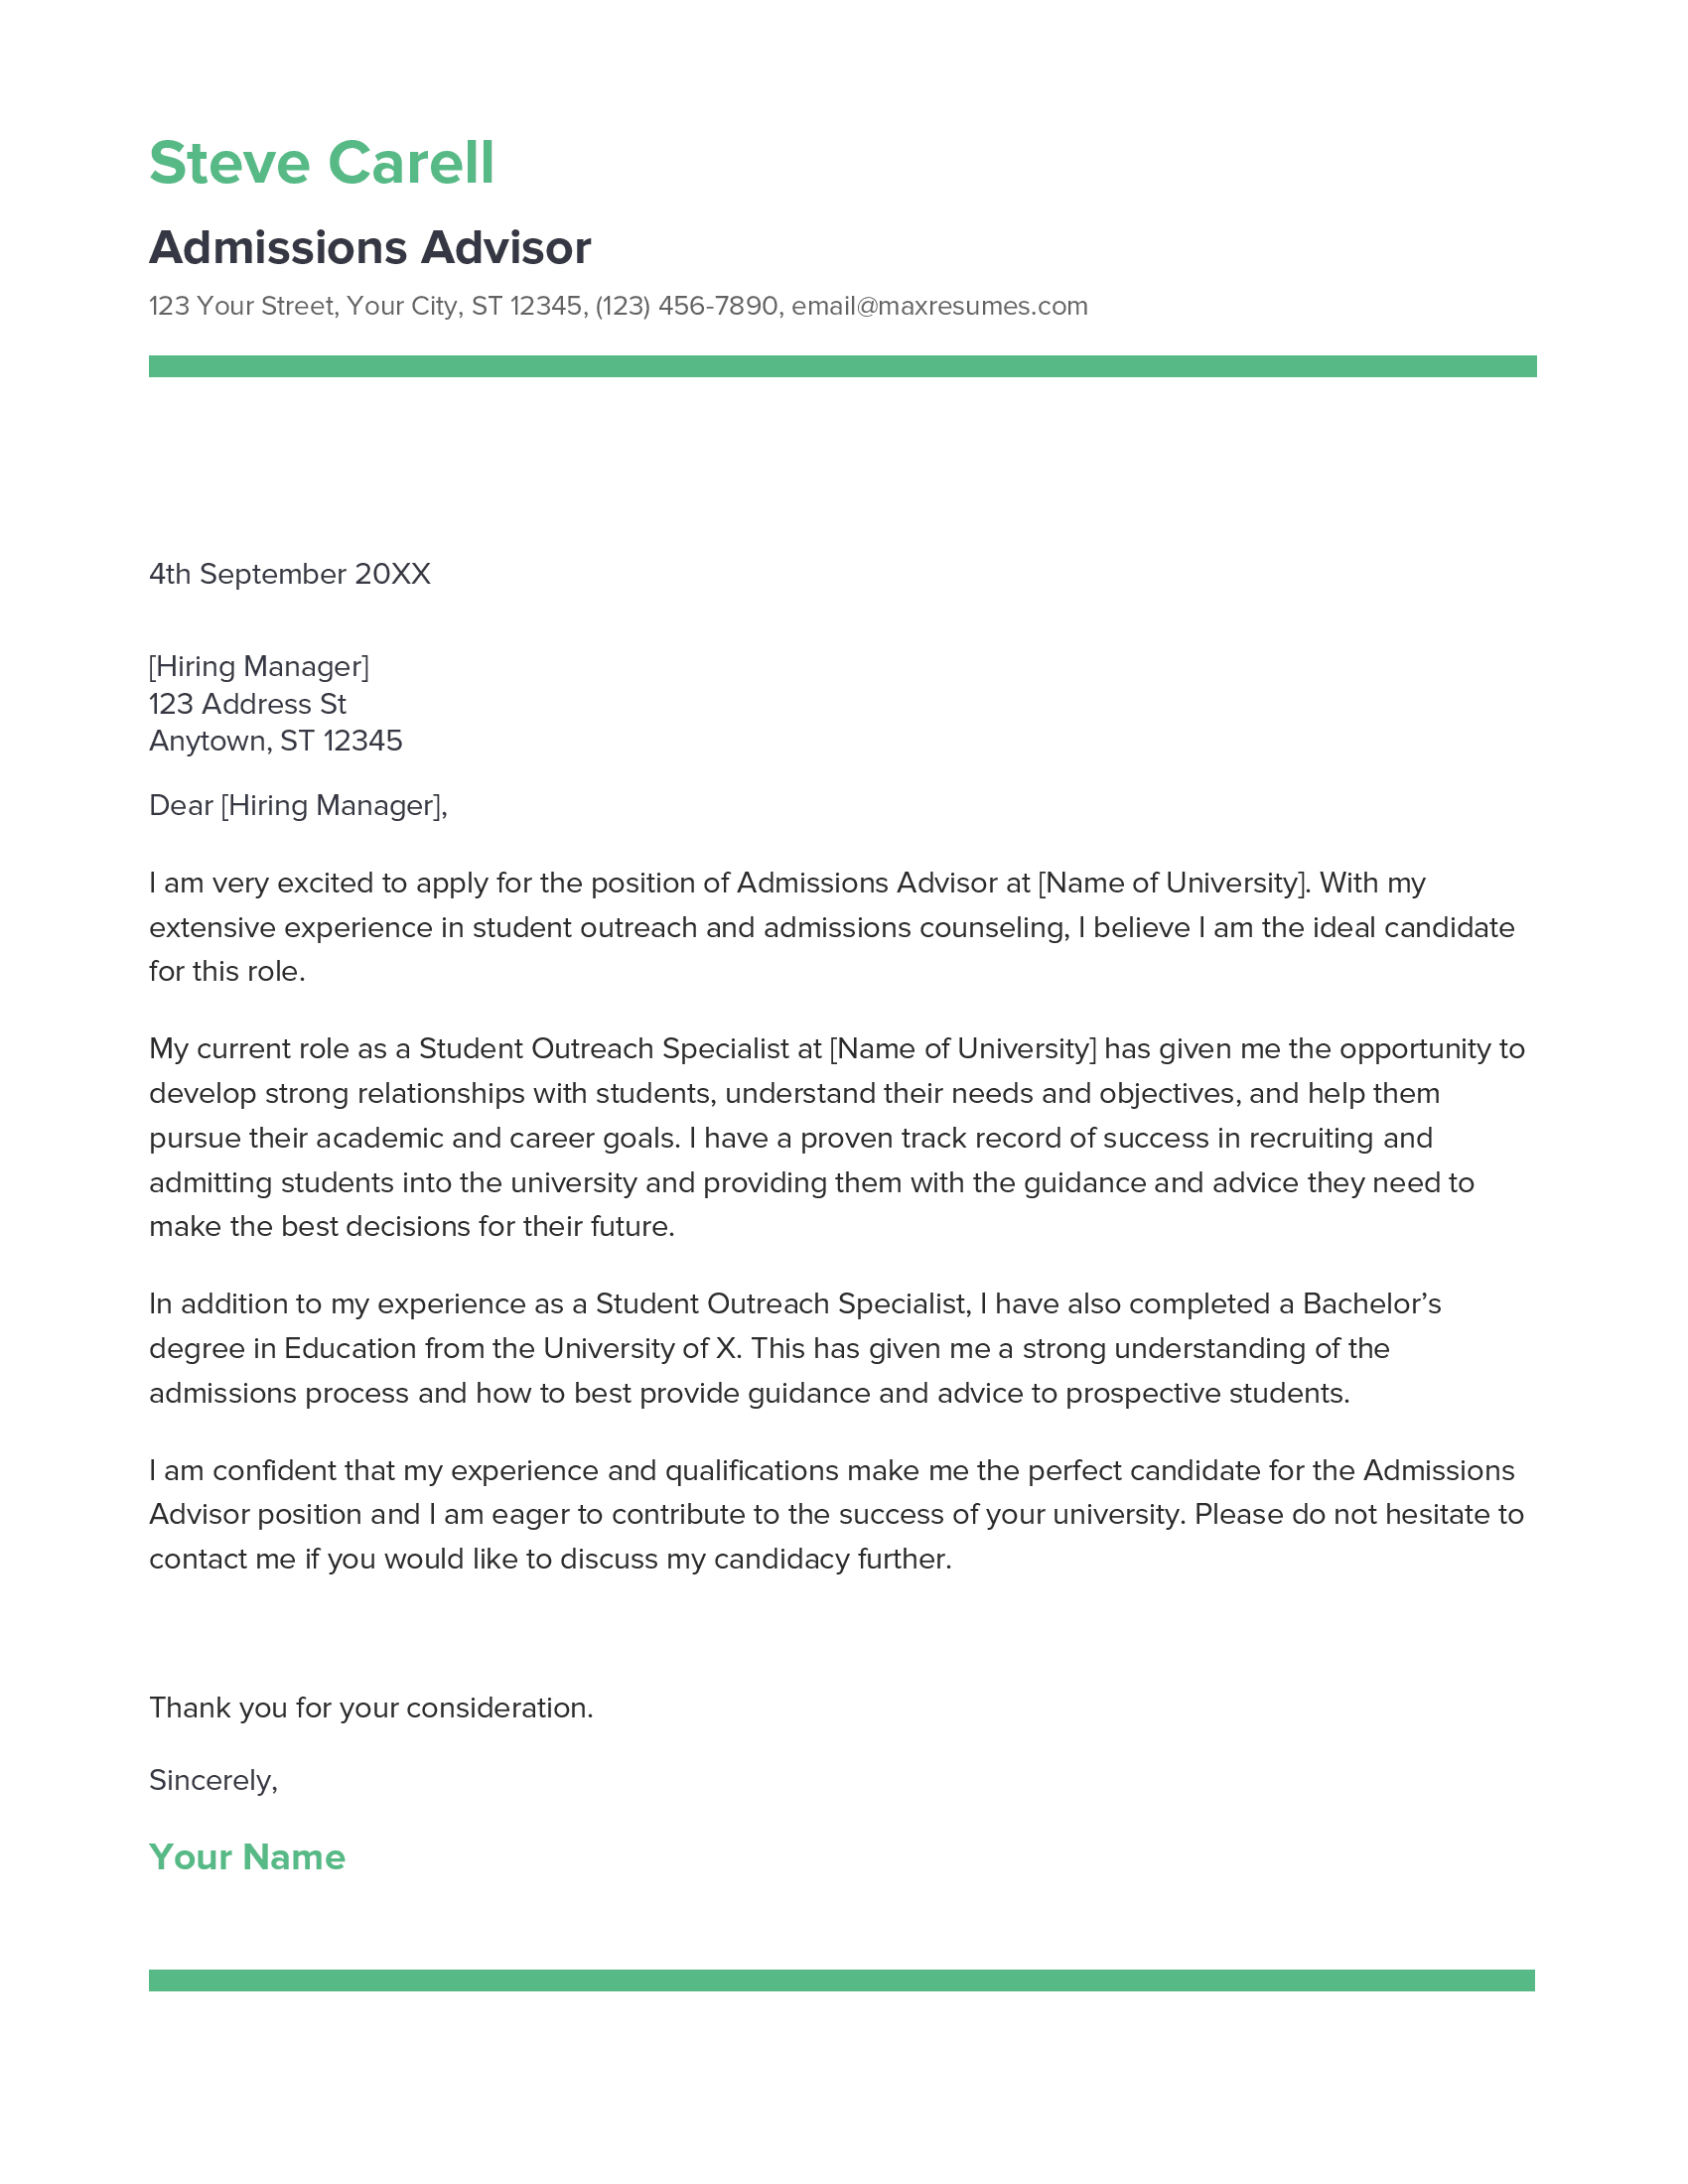 Admissions Advisor Cover Letter Example